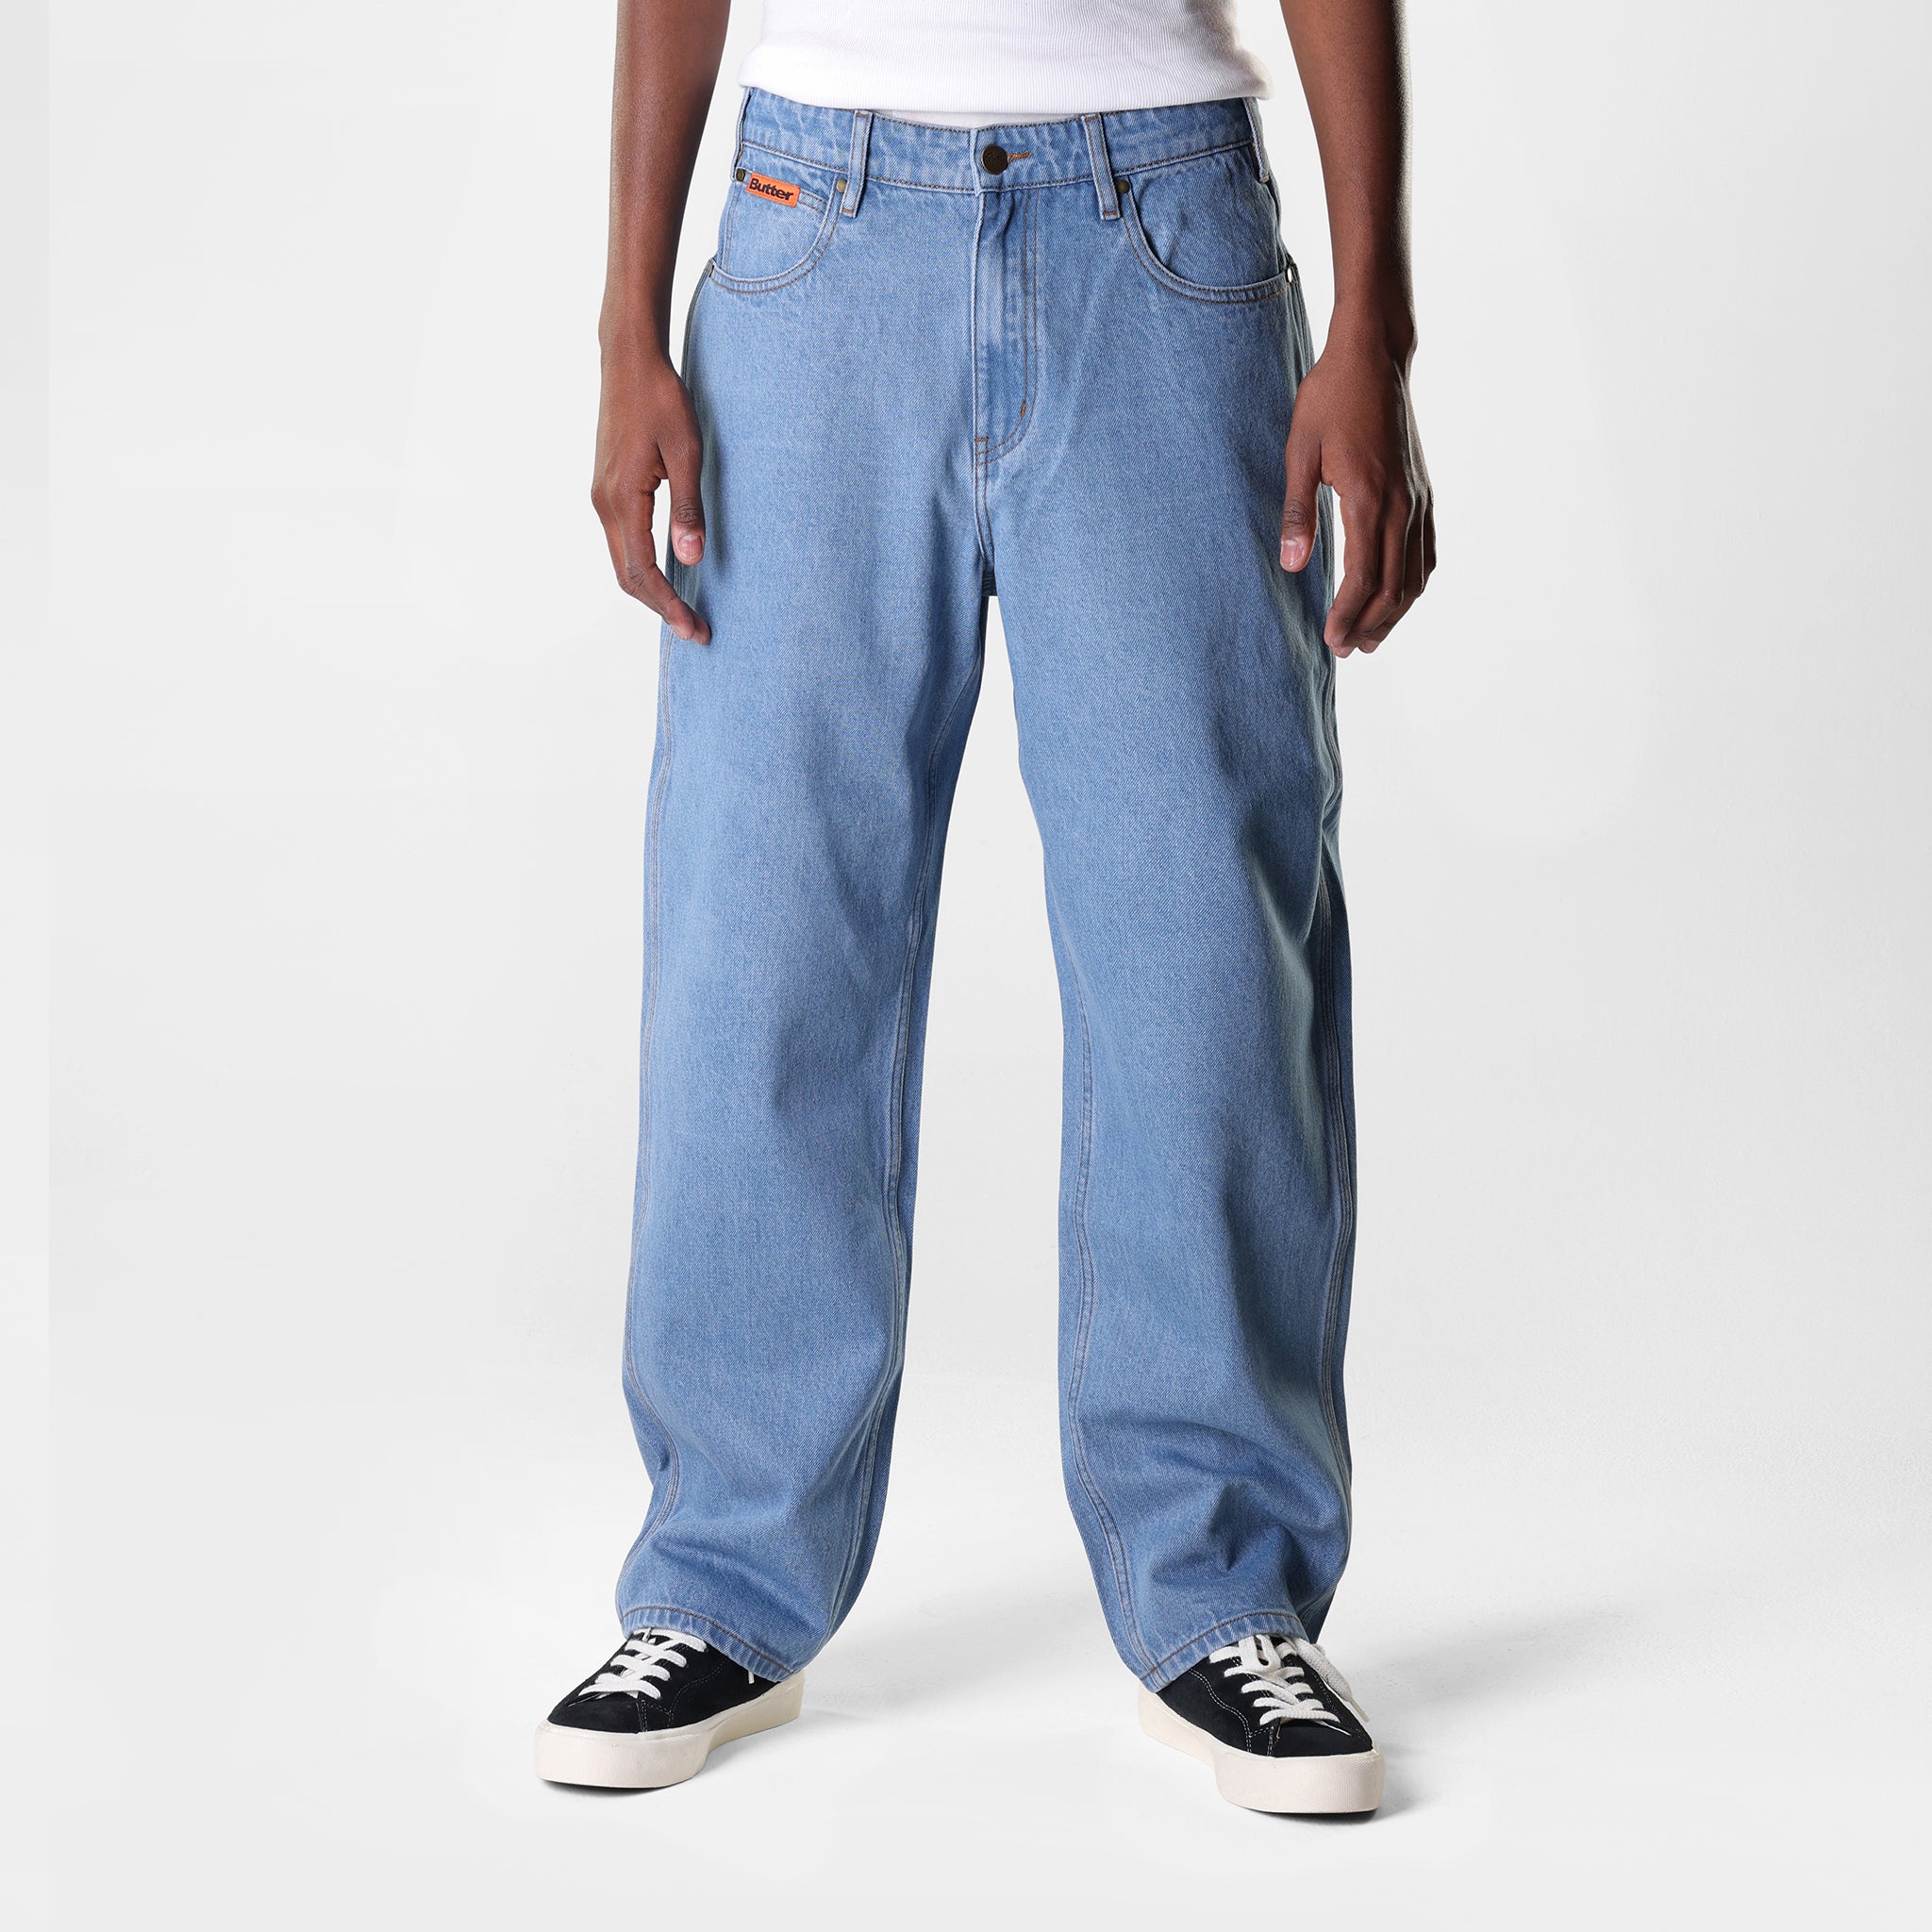 Calik Denim and Good American Collaborate on Jeans That 'Always Fit'